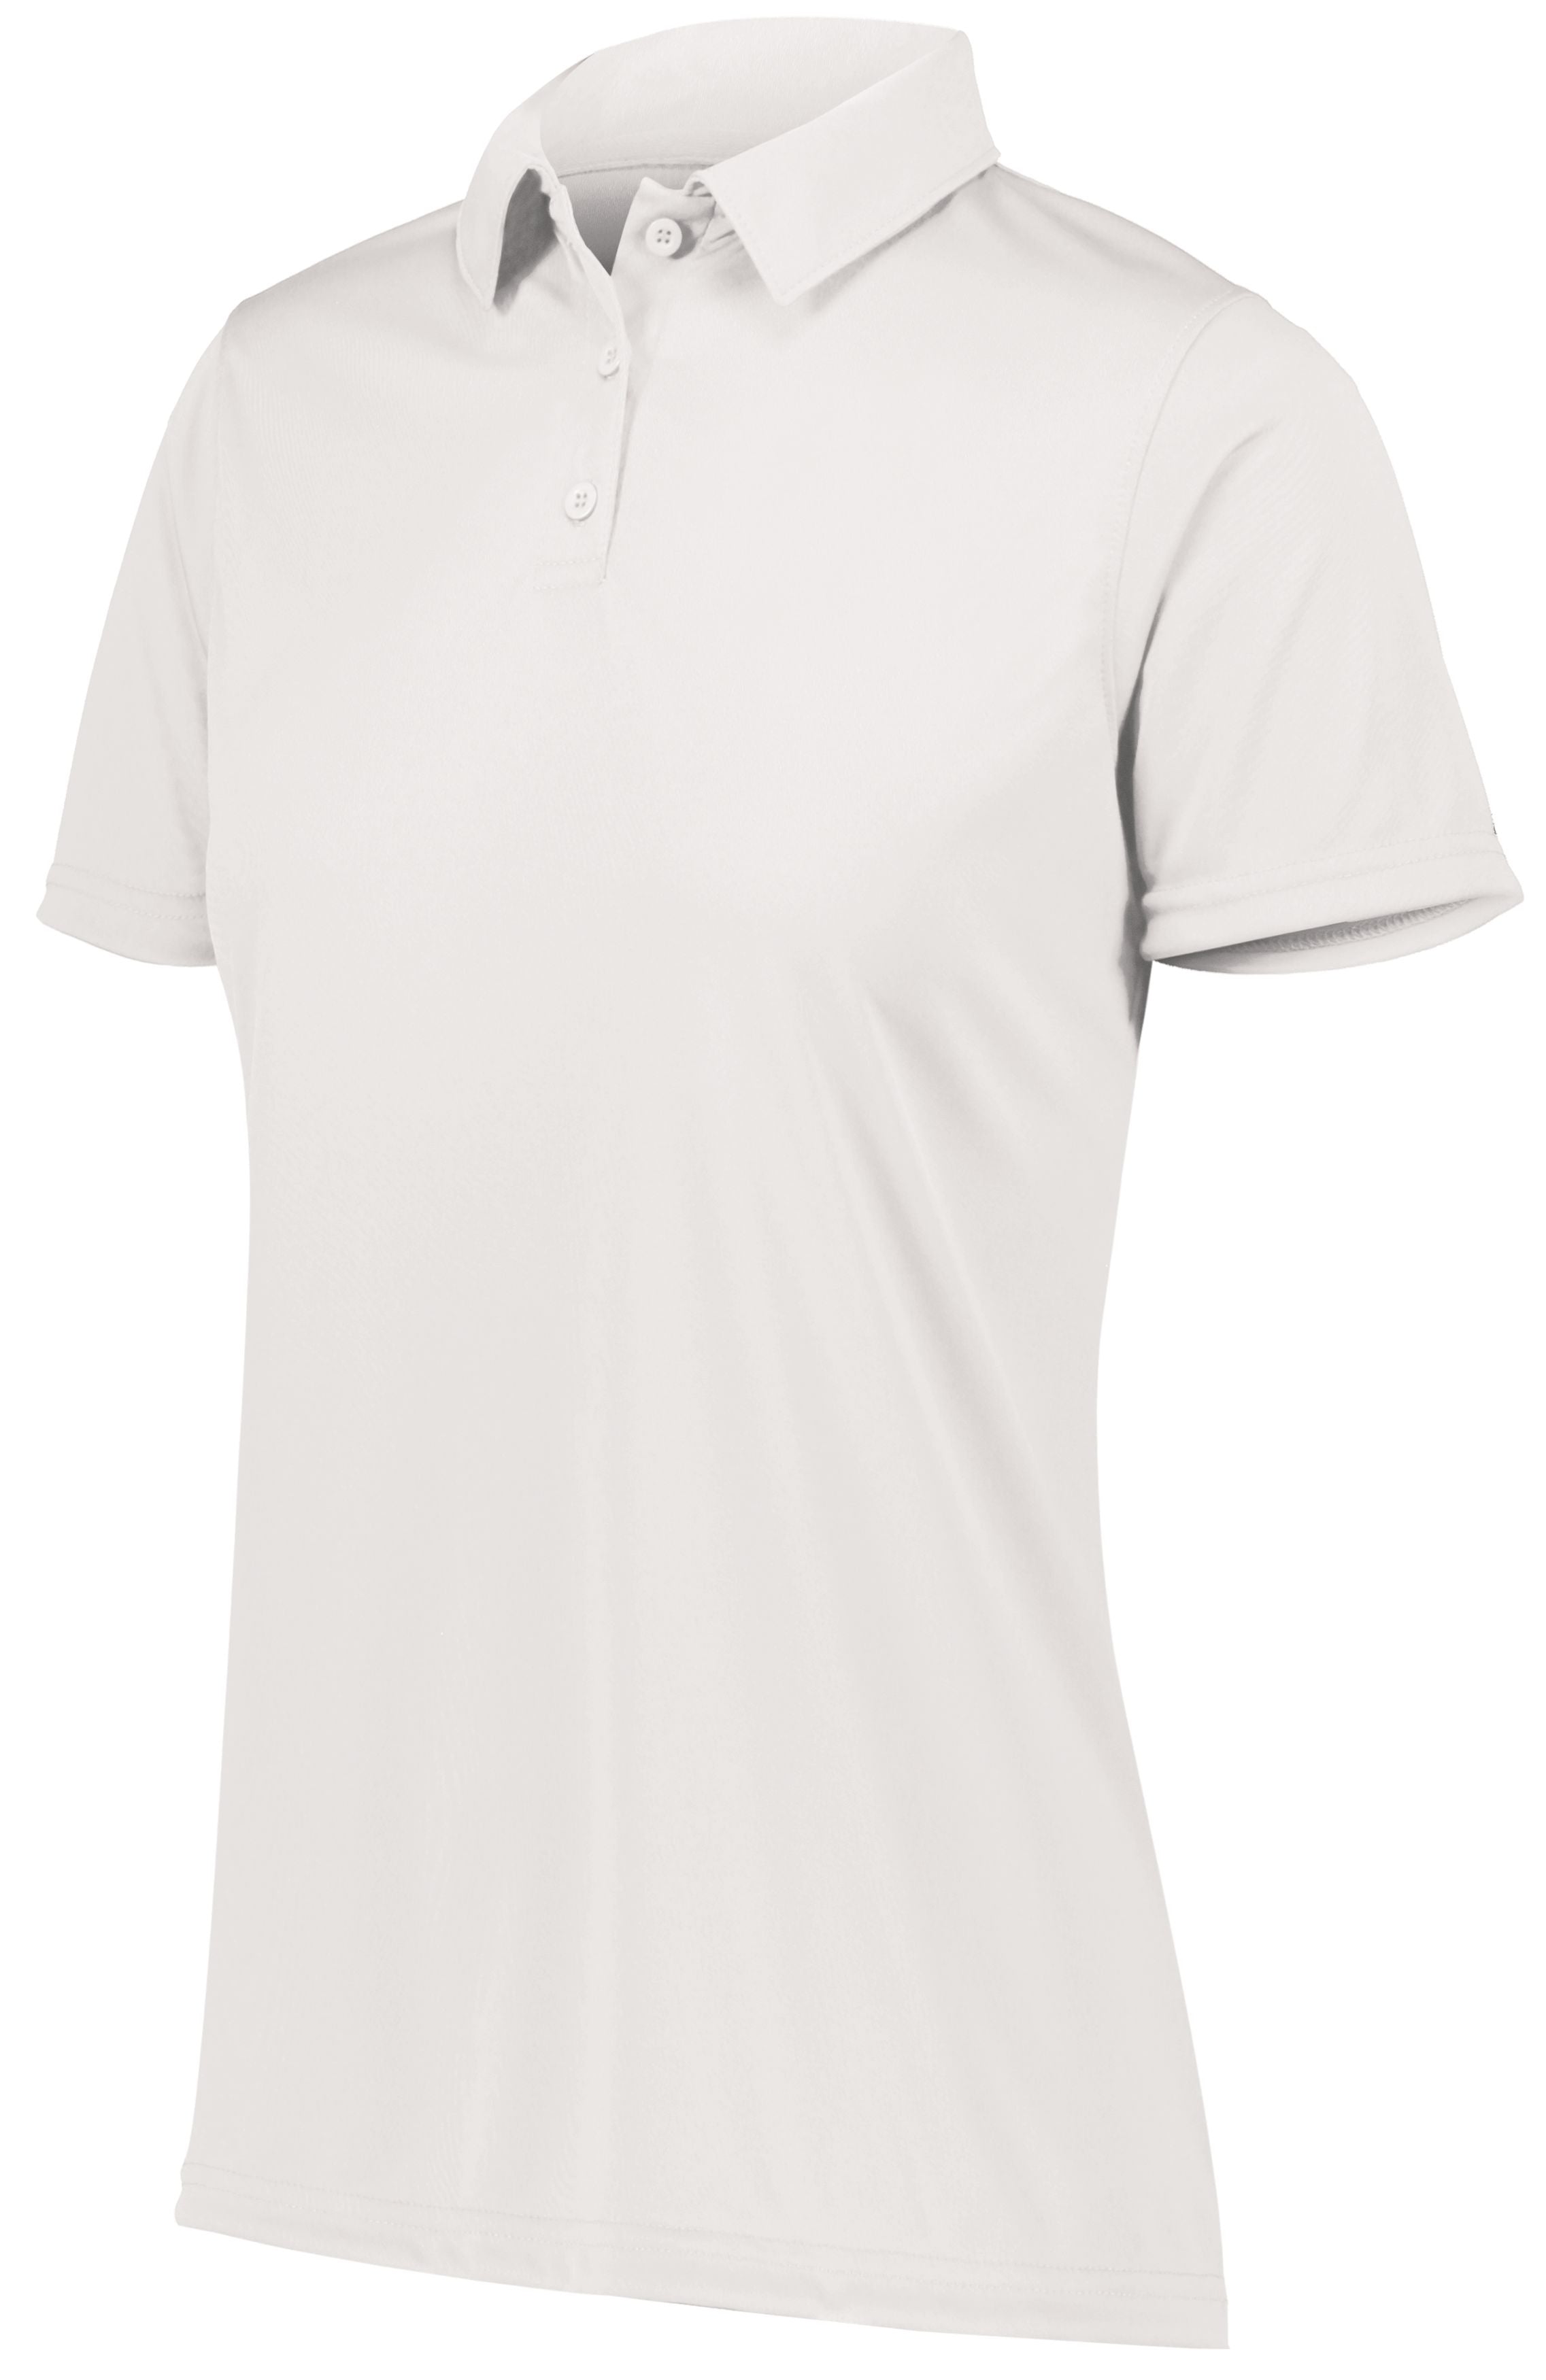 Augusta Sportswear Ladies Vital Polo in White  -Part of the Ladies, Ladies-Polo, Polos, Augusta-Products, Shirts product lines at KanaleyCreations.com